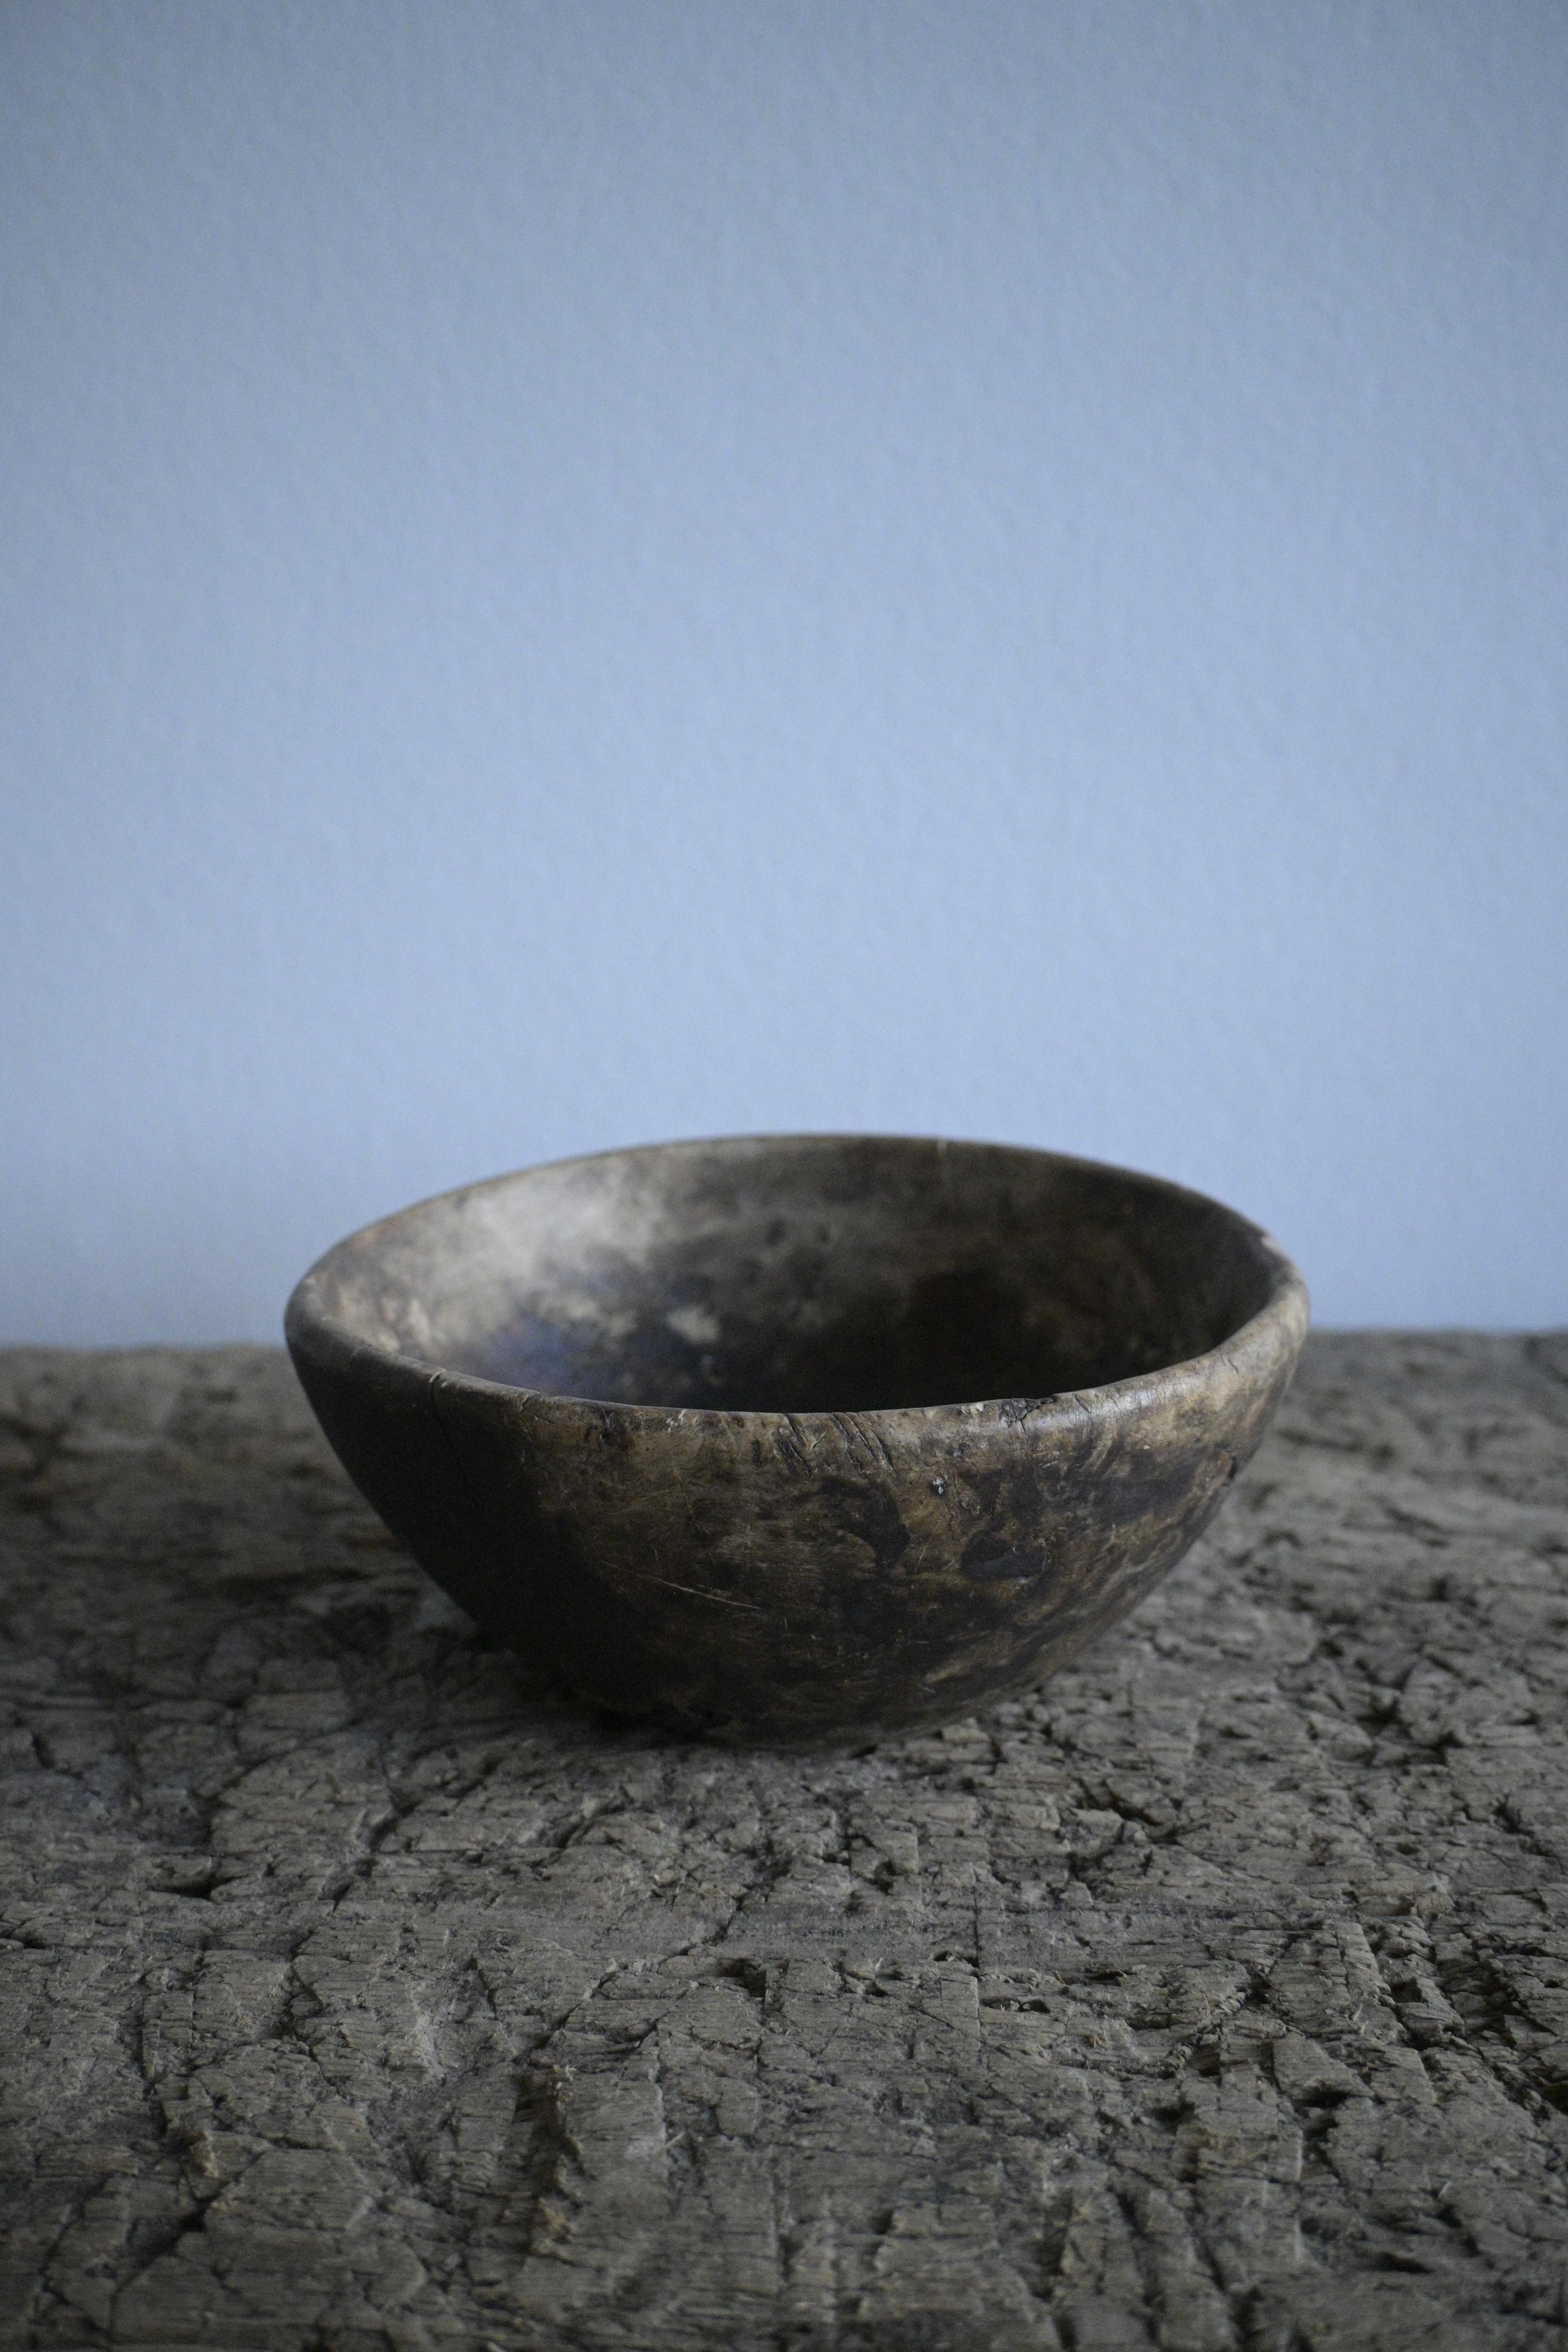 Birch Swedish Root Bowl early 1800 century from Gagnef, Dalarna For Sale